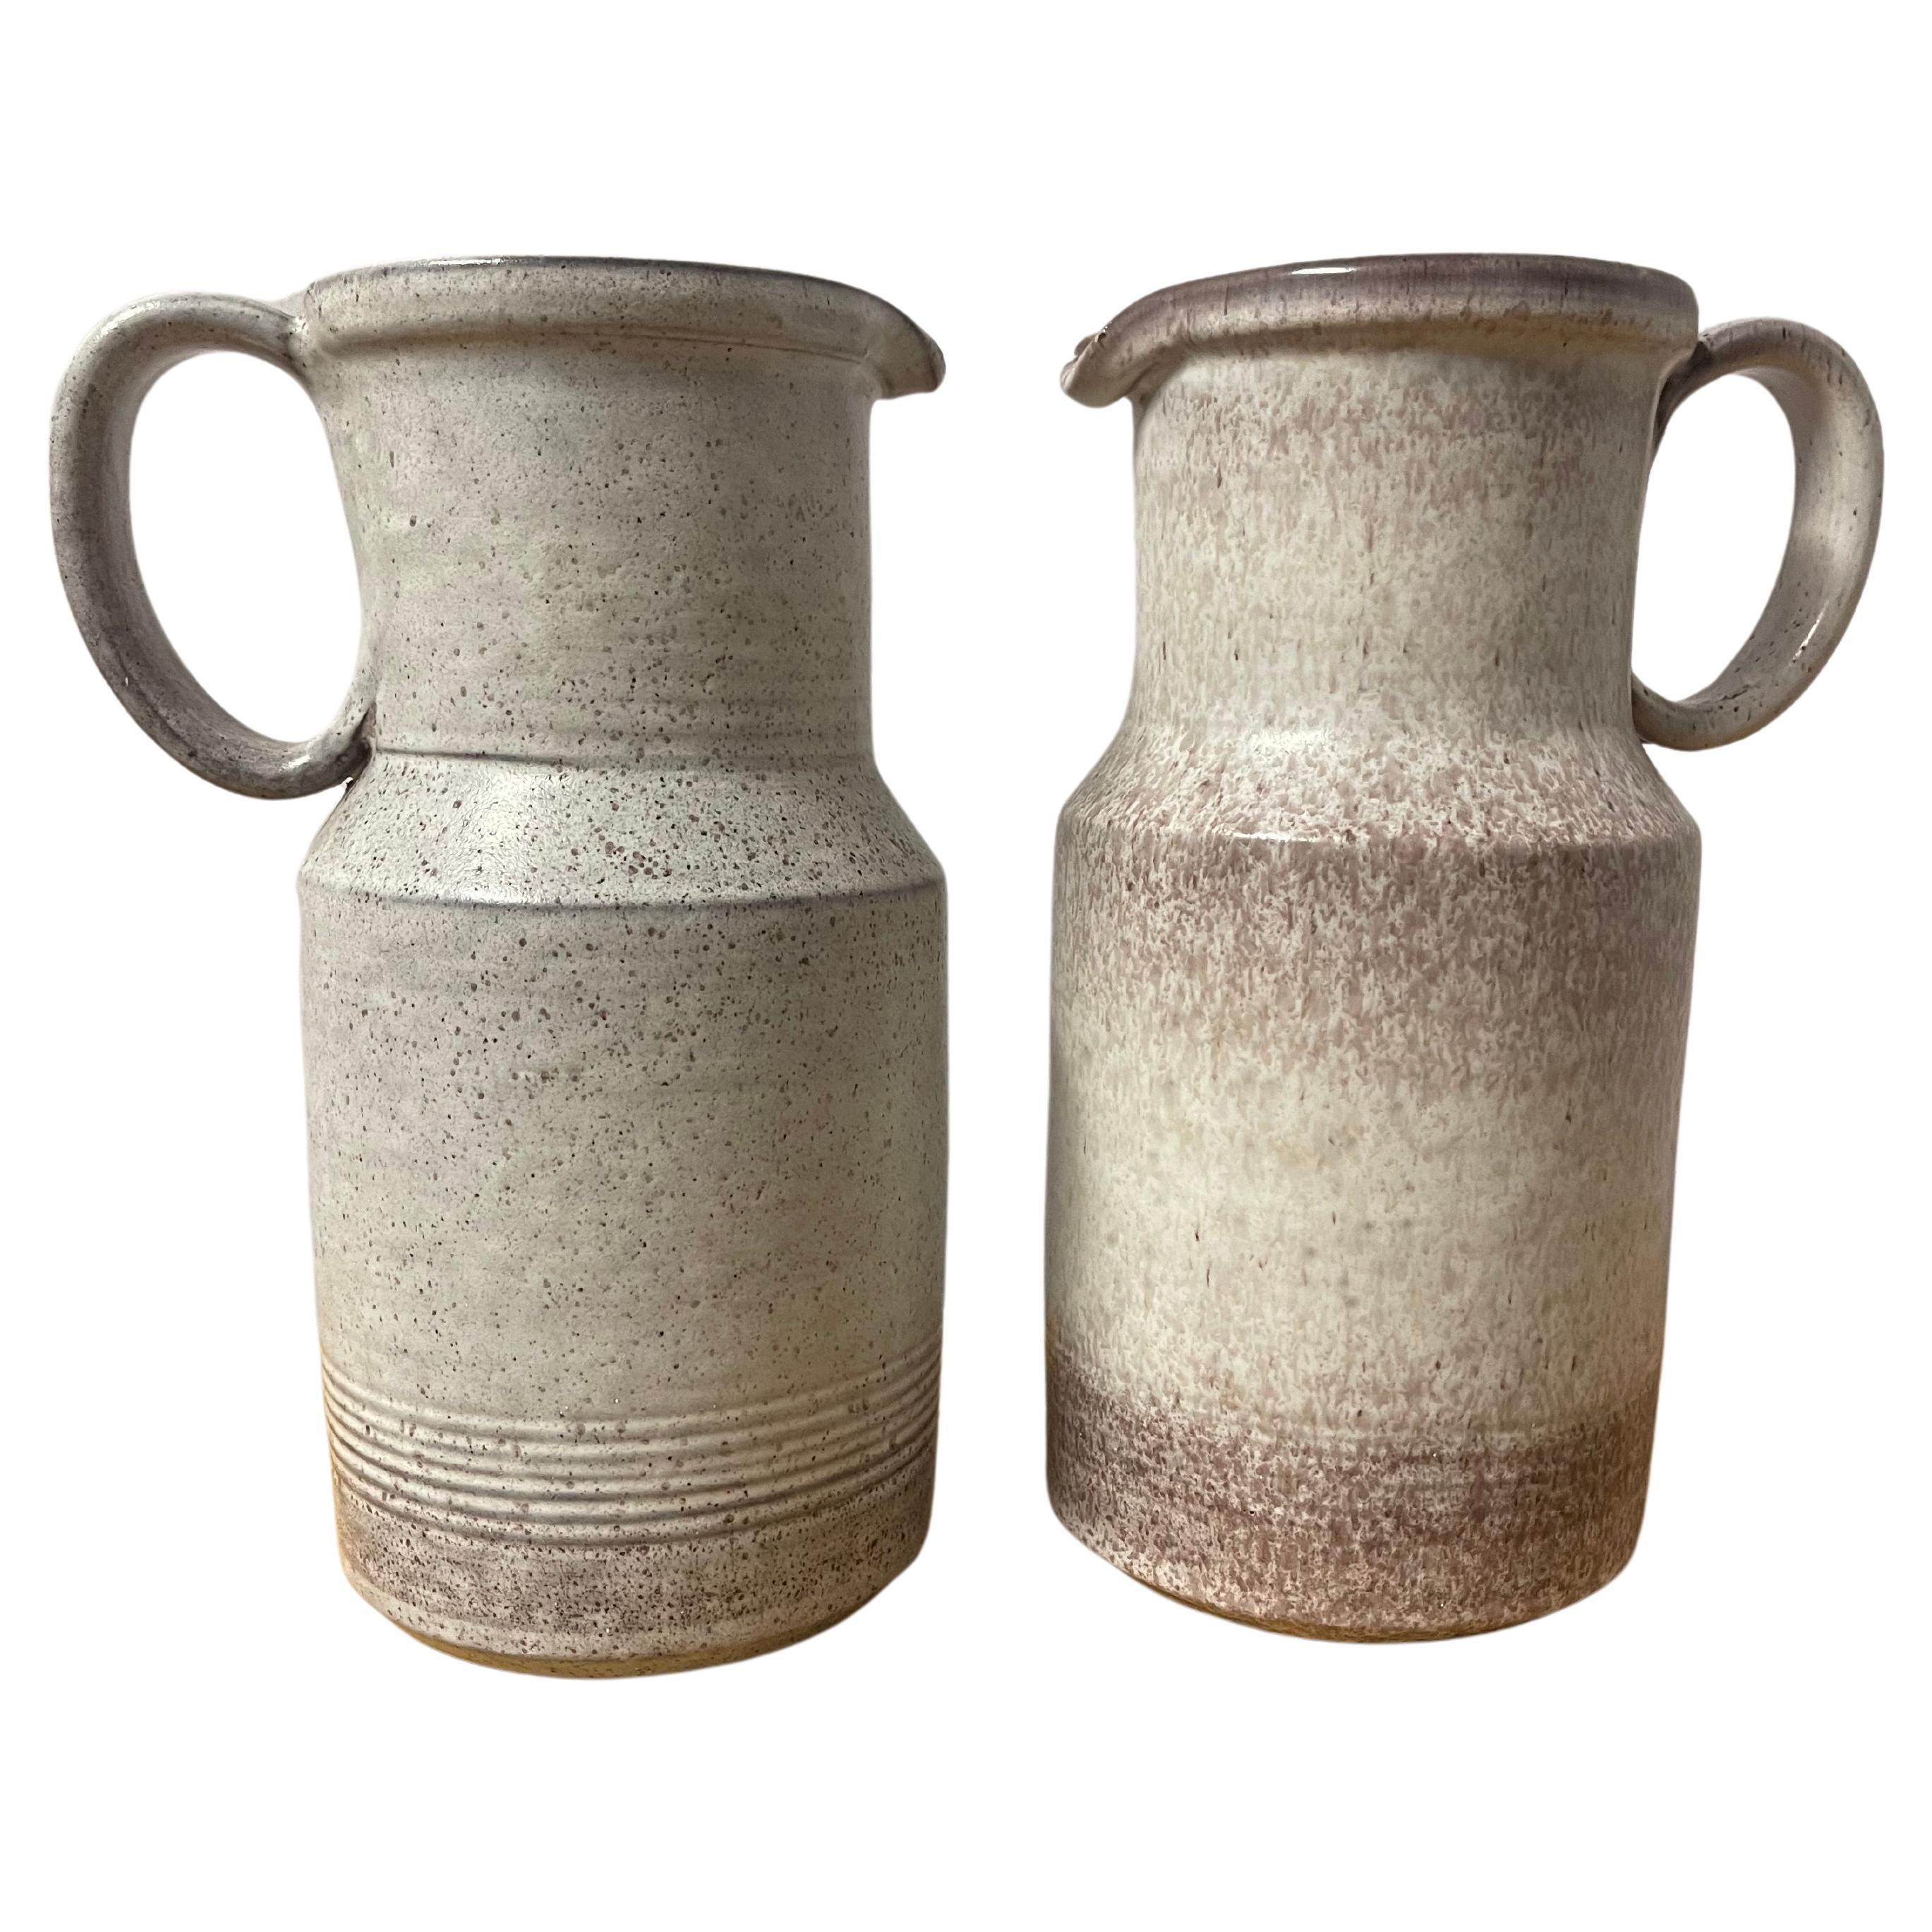 Stoneware Carafes by Alessio Tasca, 1970s, Set of 2